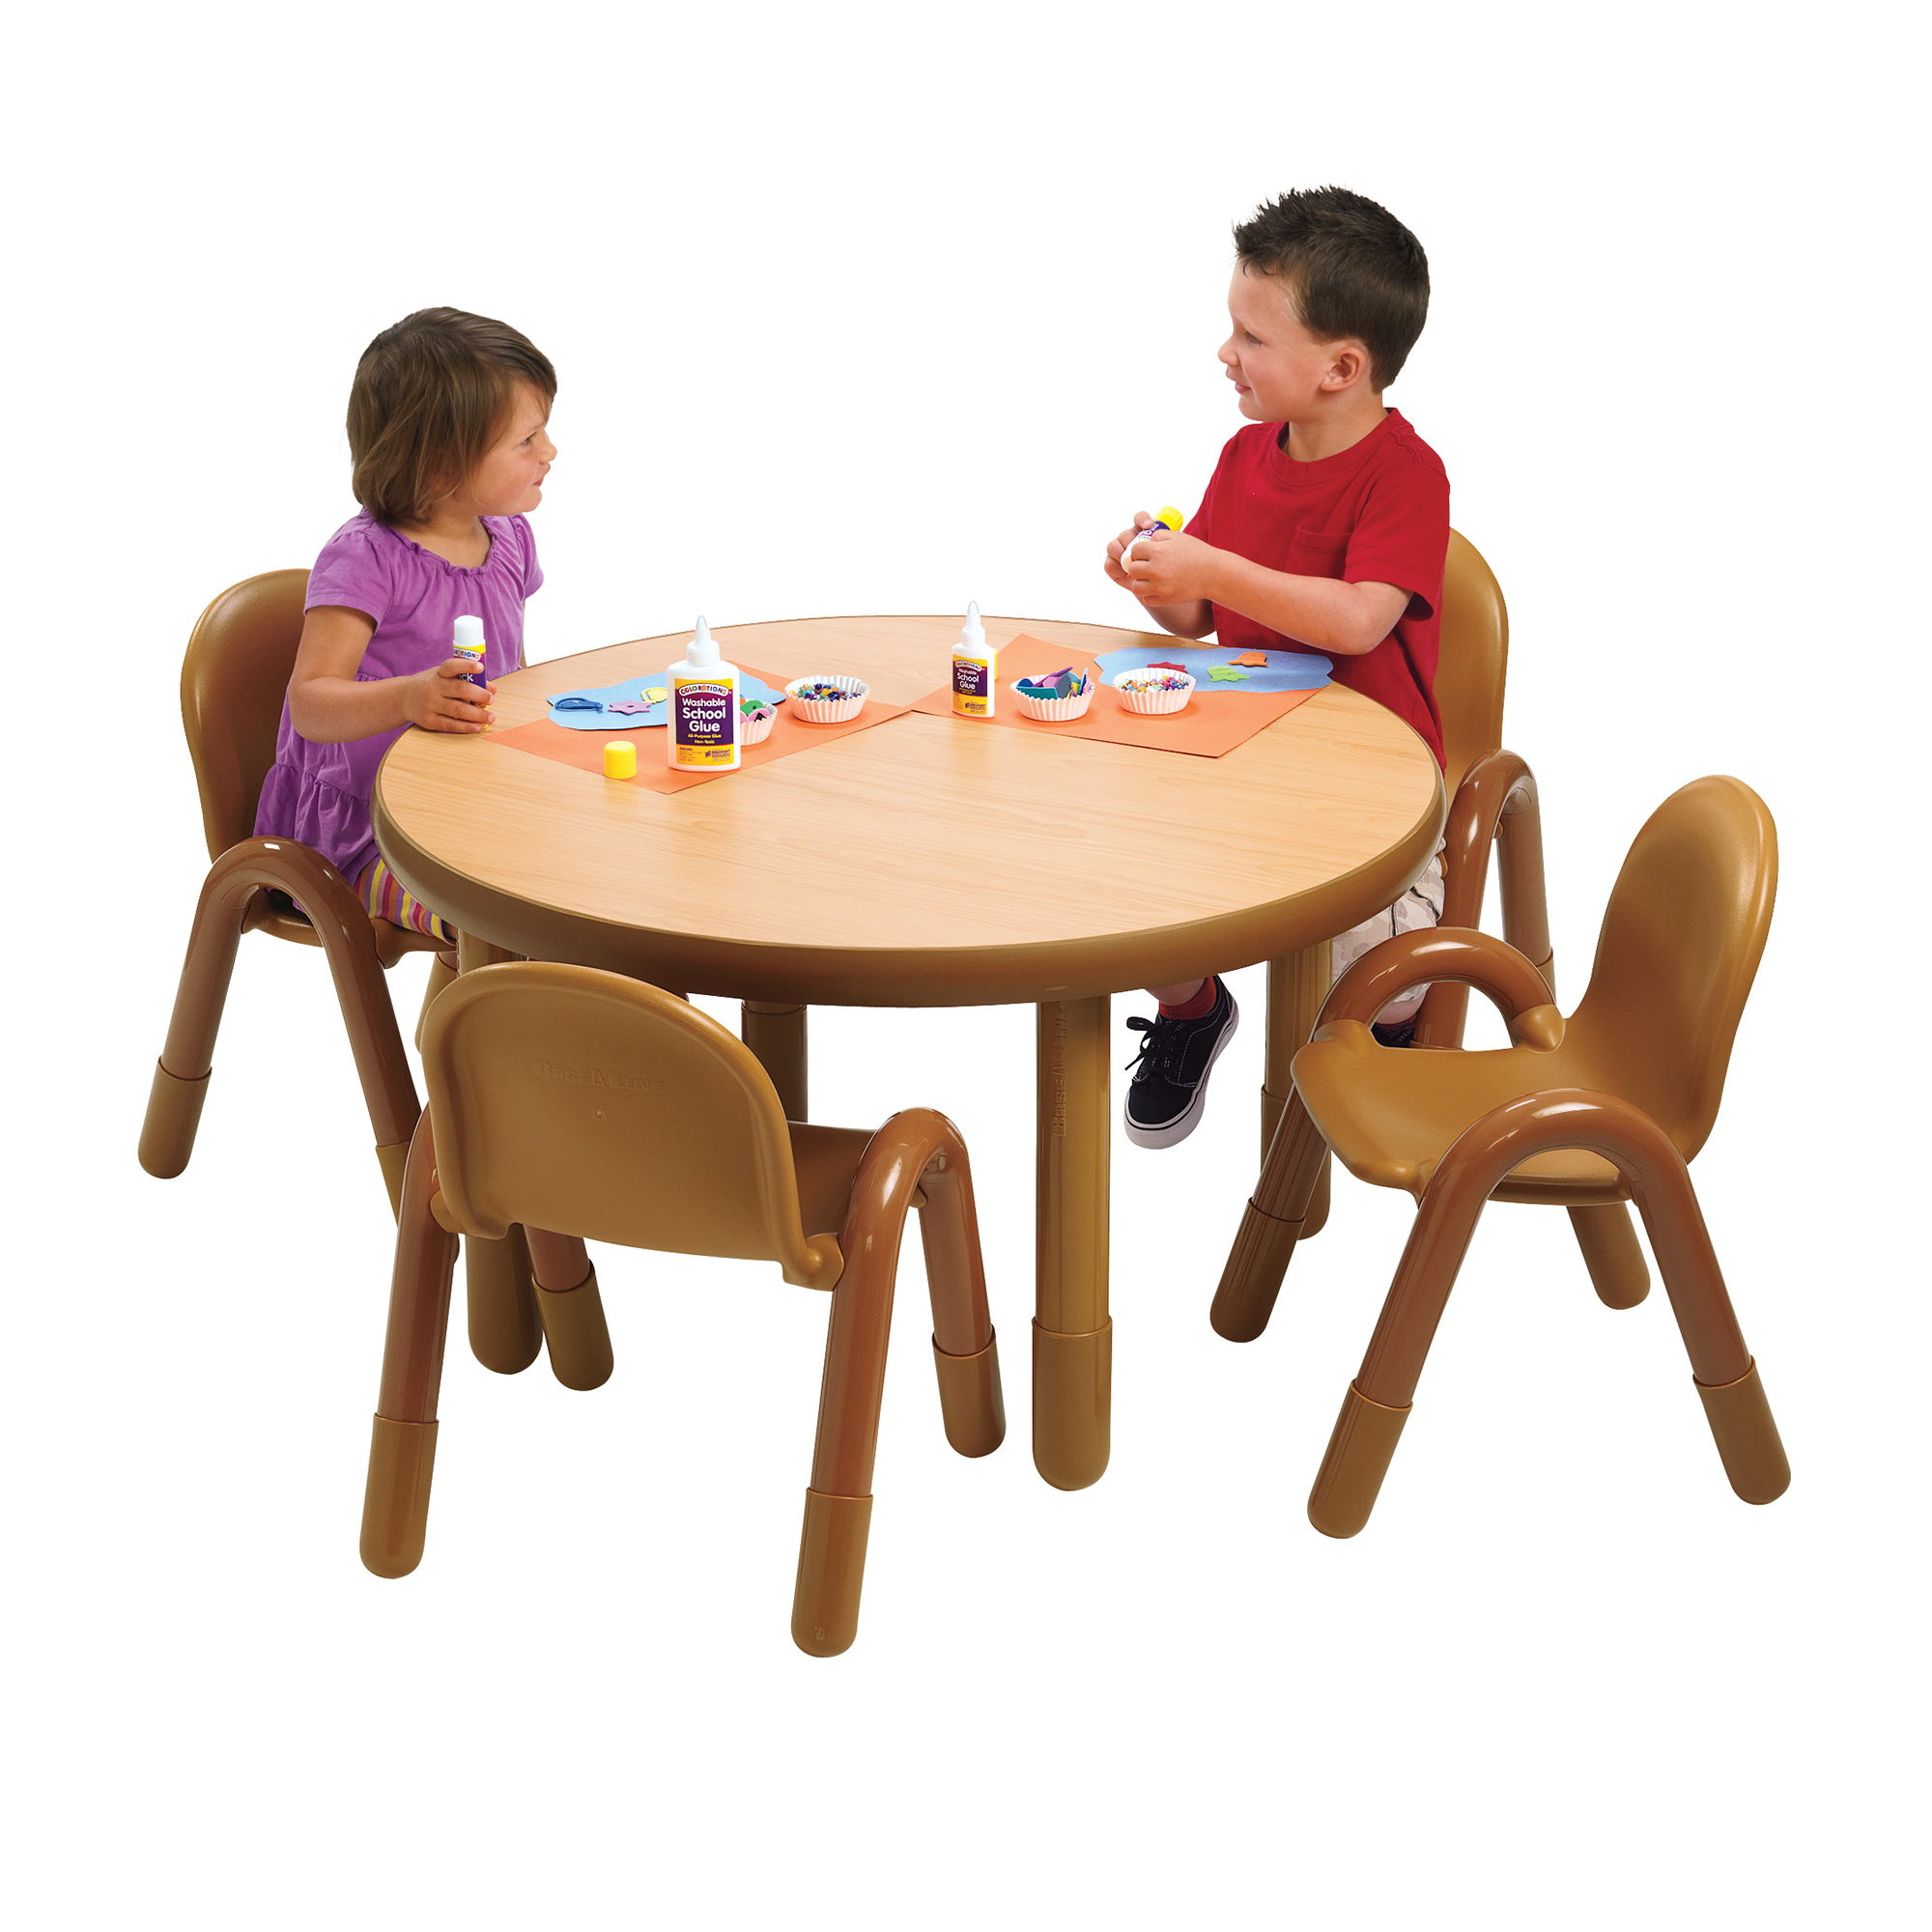 Round Baseline Preschool Table and Chair Set in Natural